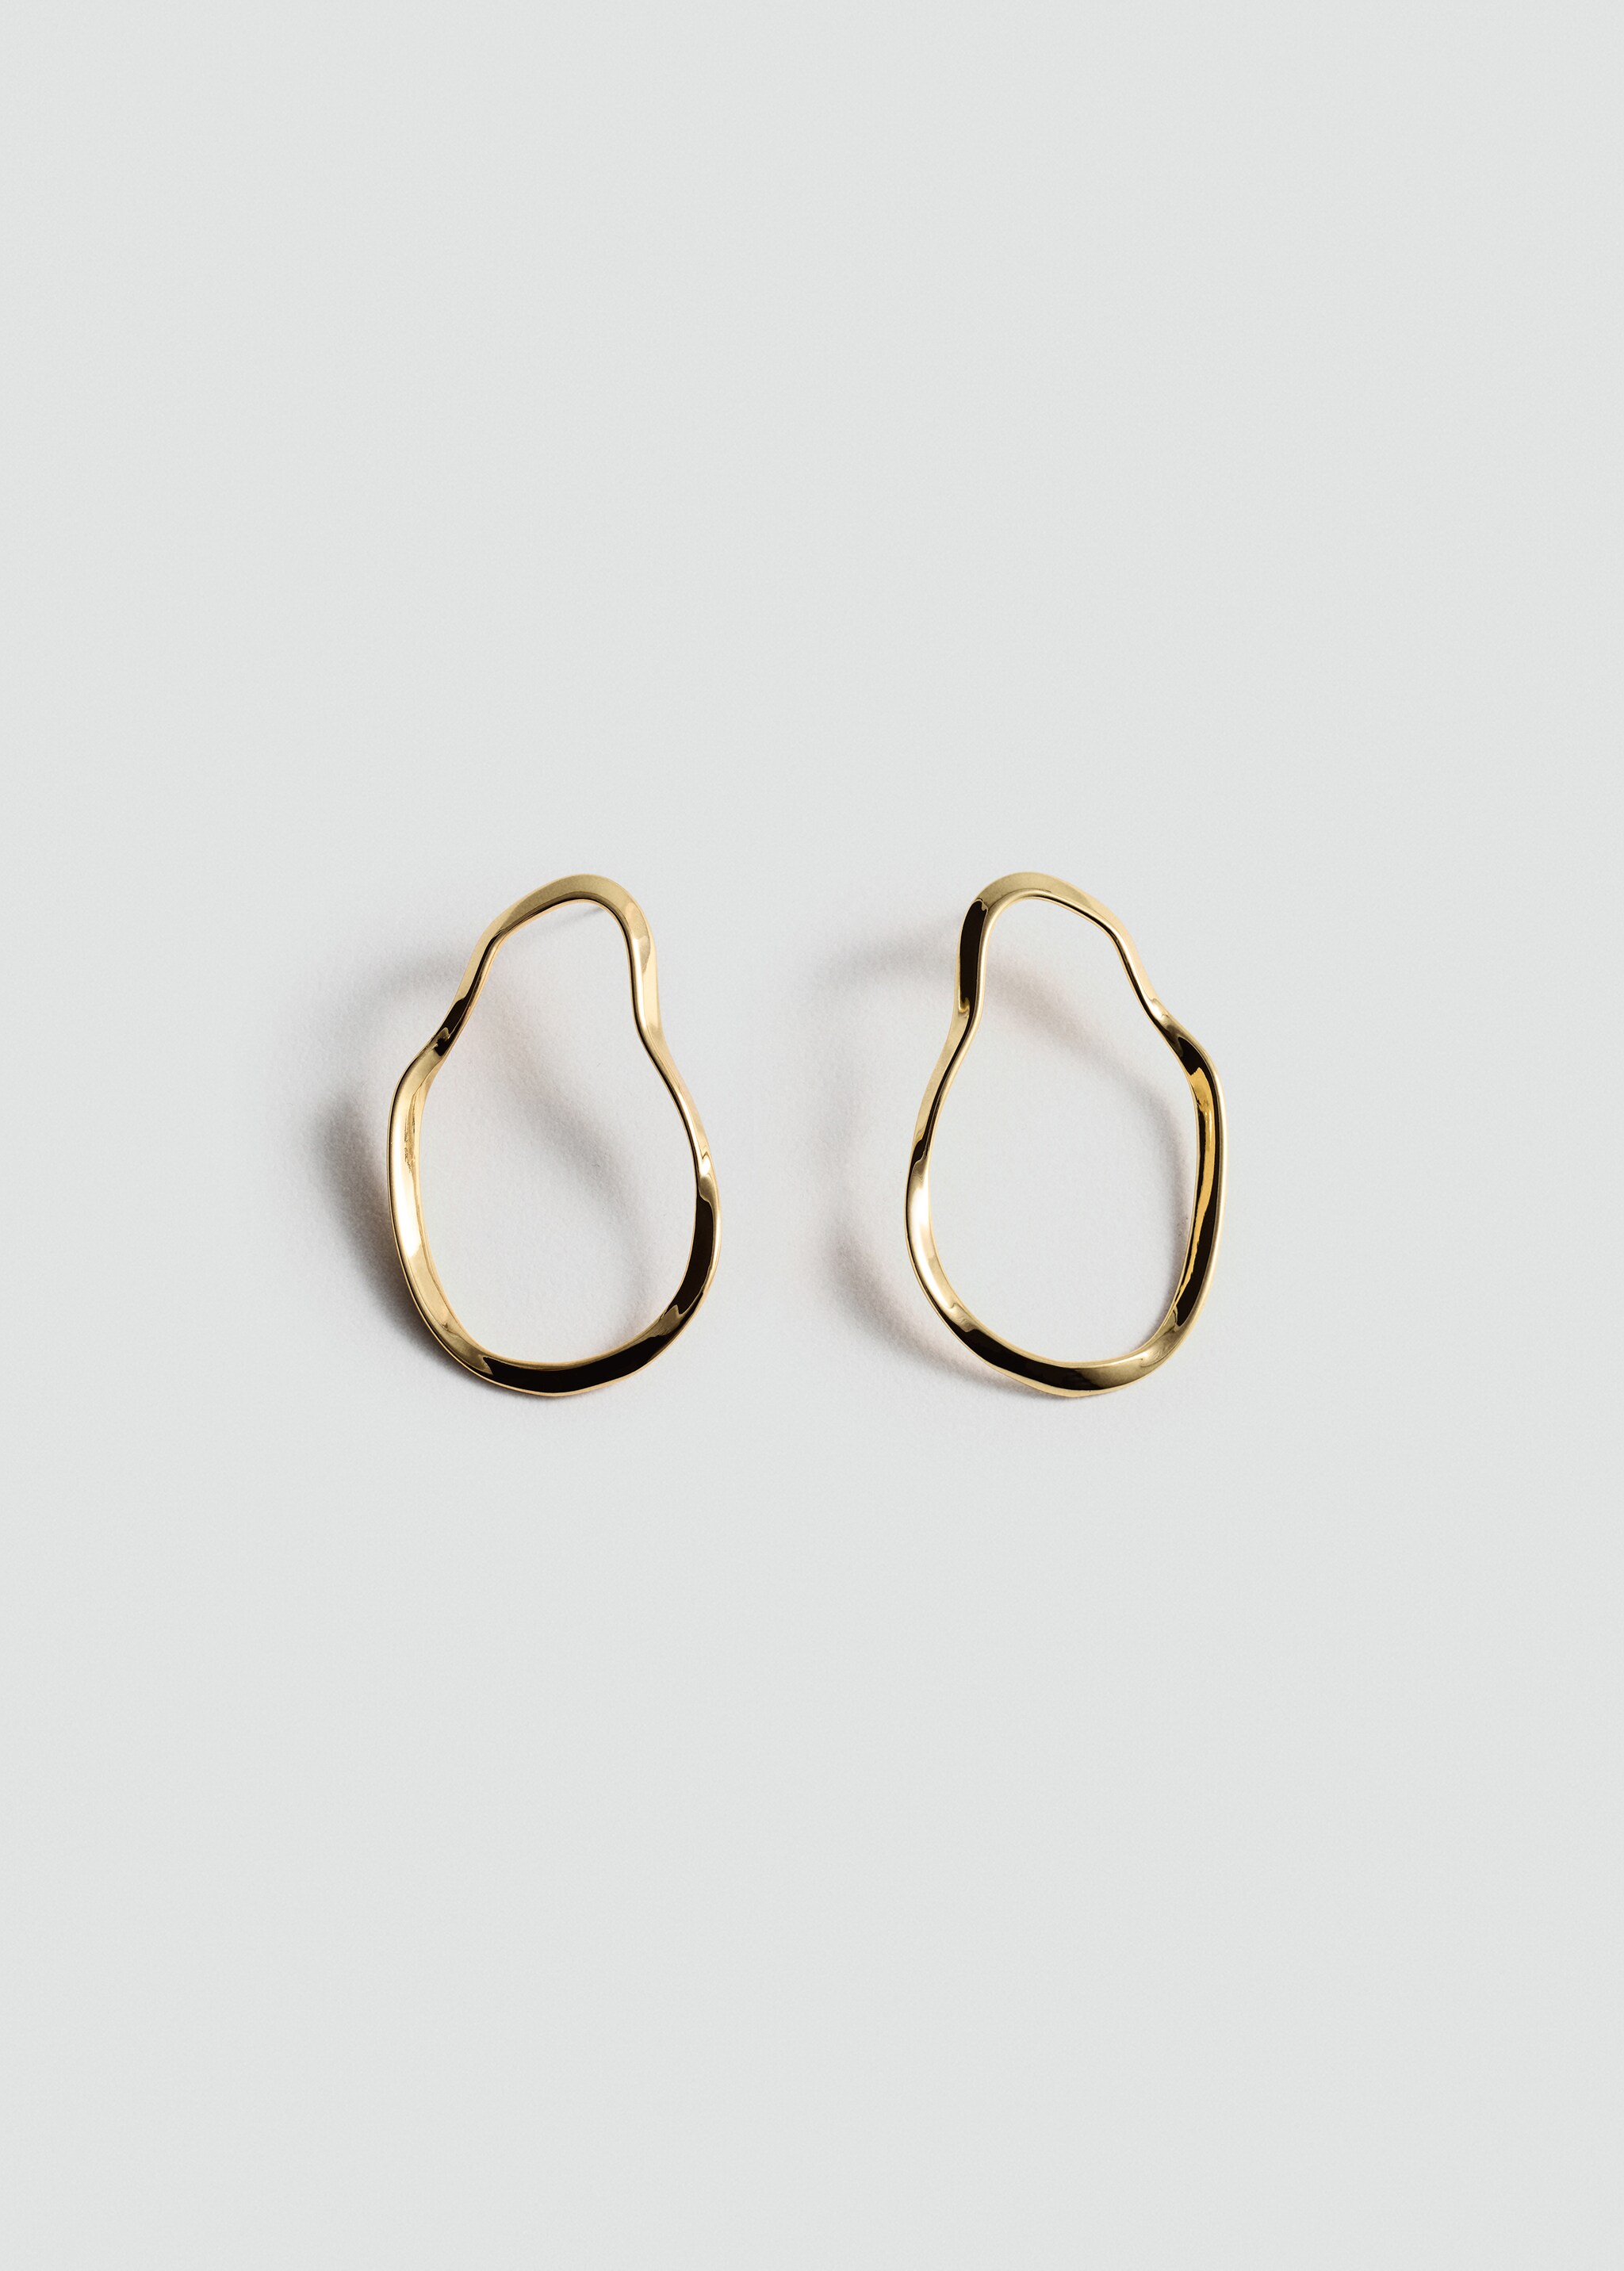 Irregular oval earrings - Article without model